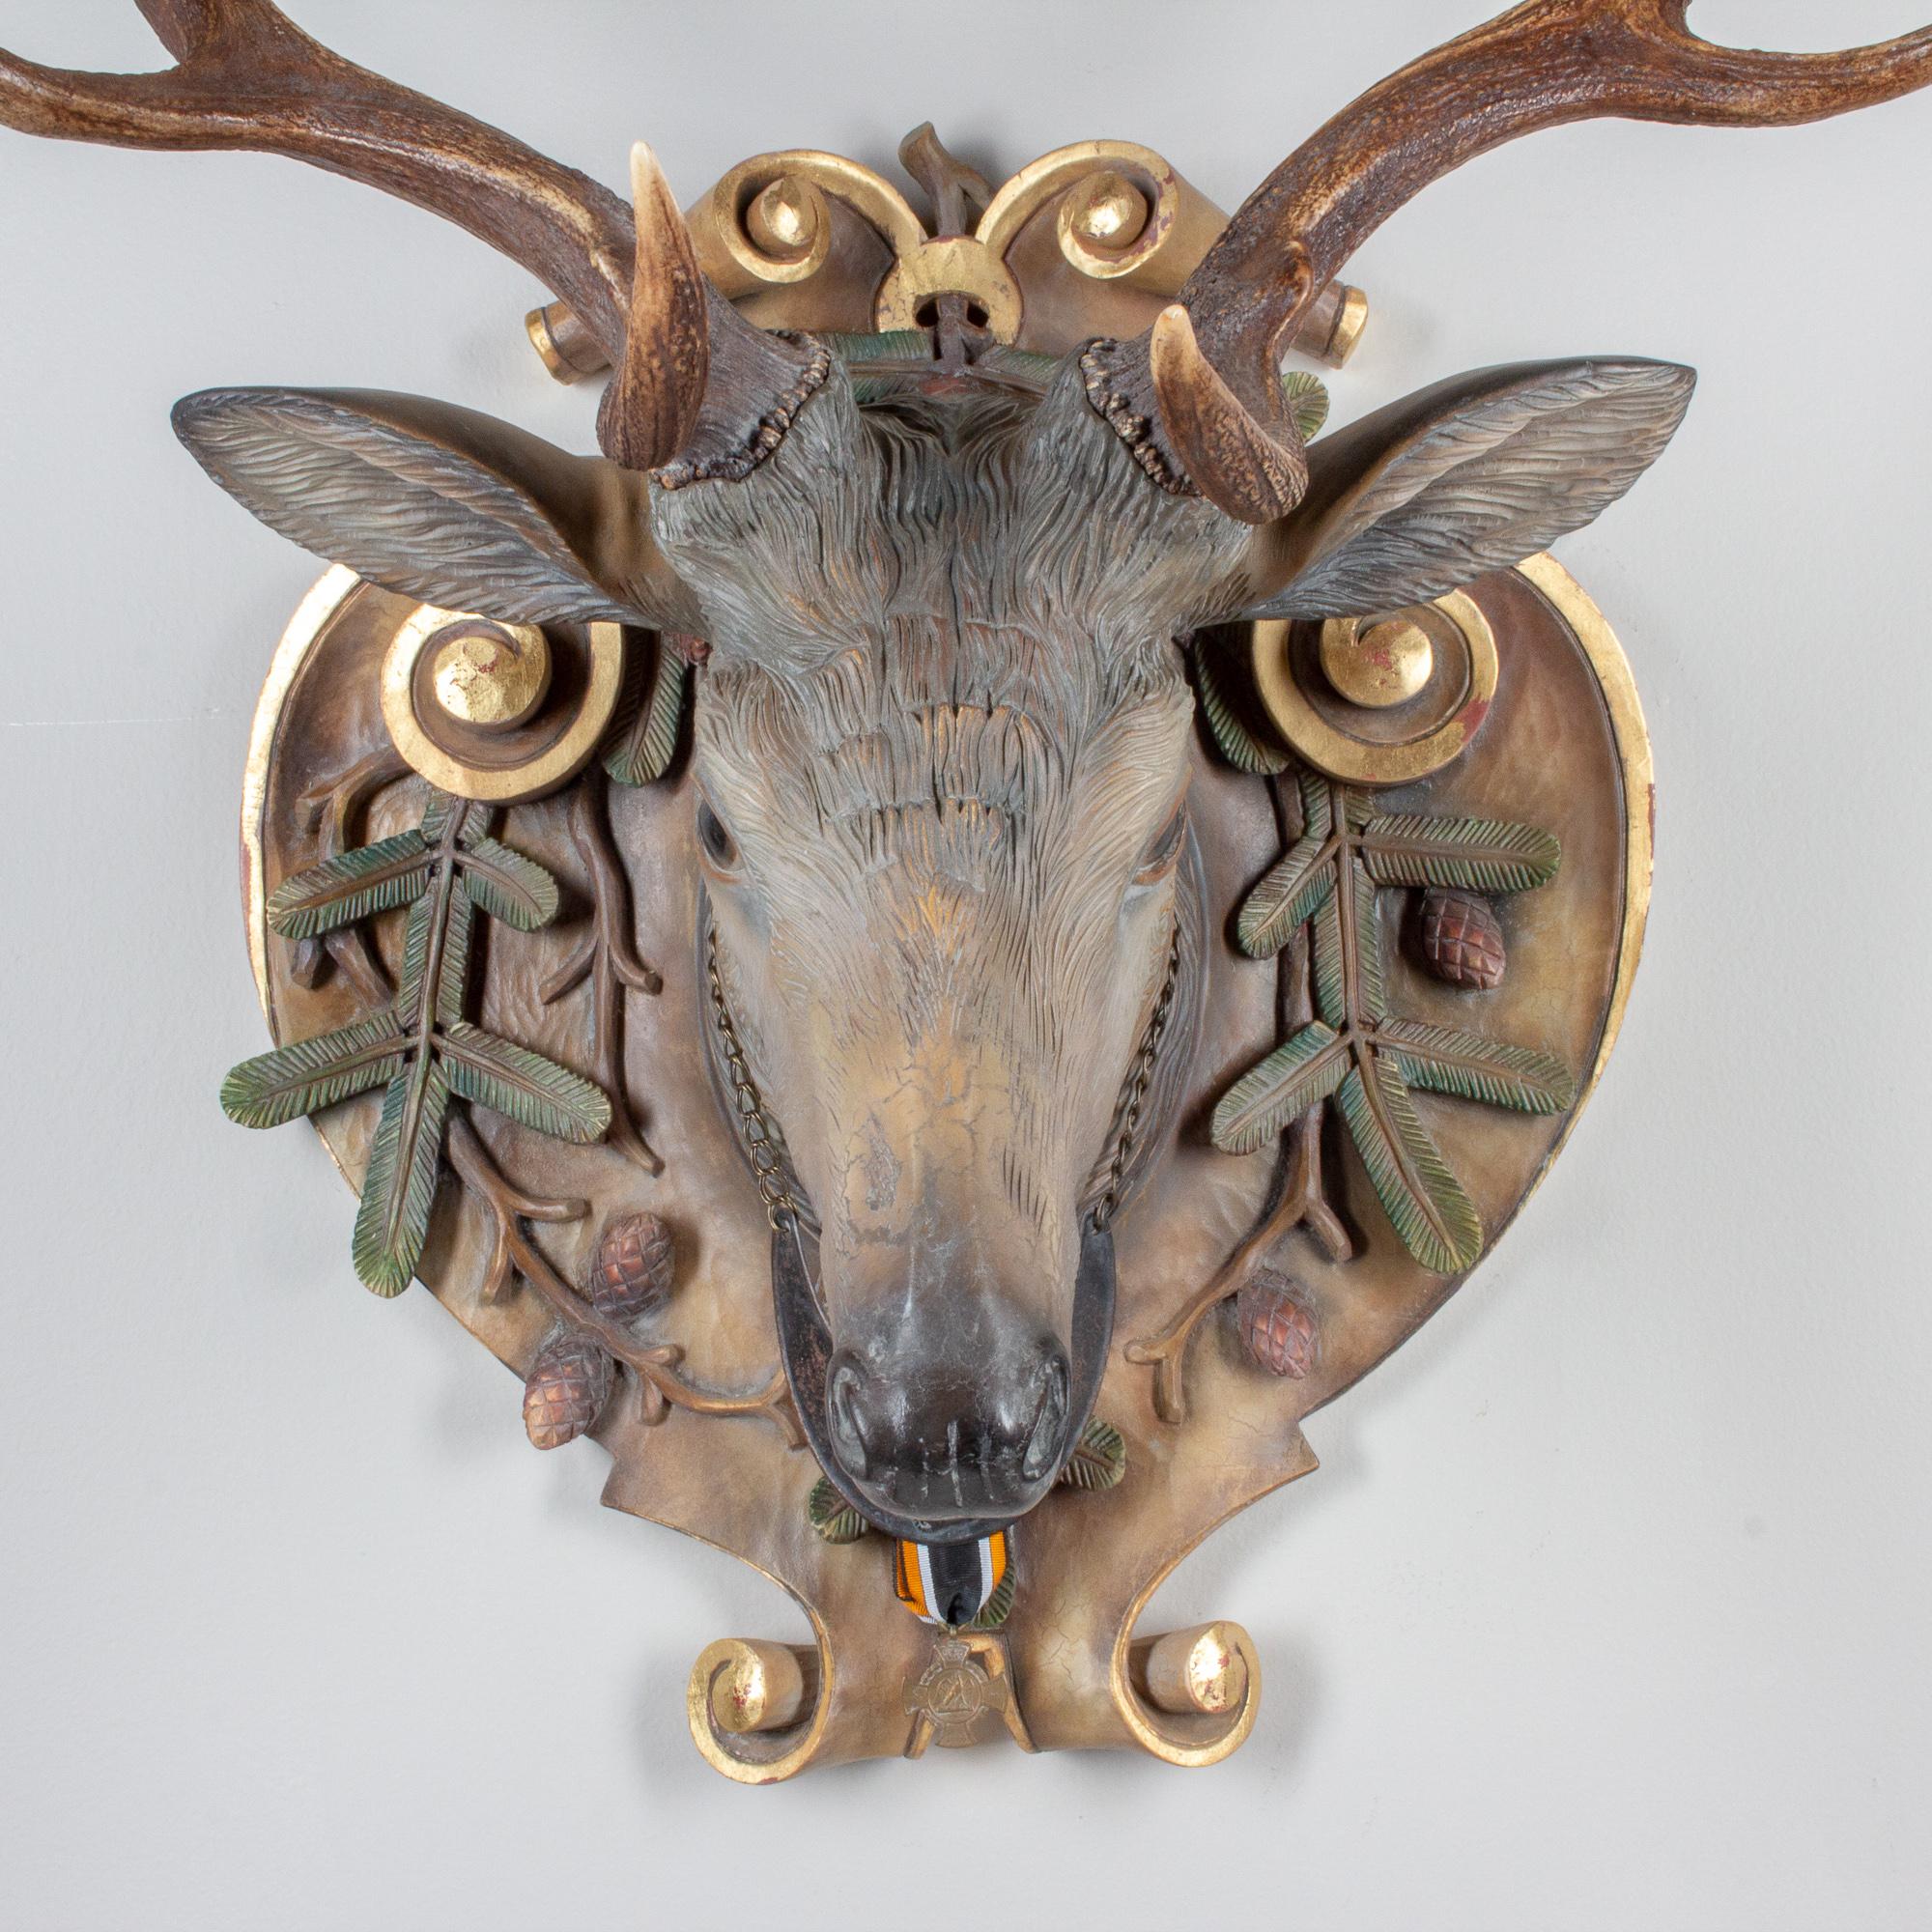 19th Century Hand-Carved Fallow Deer with Antique Habsburg Antlers from Eckartsau Castle